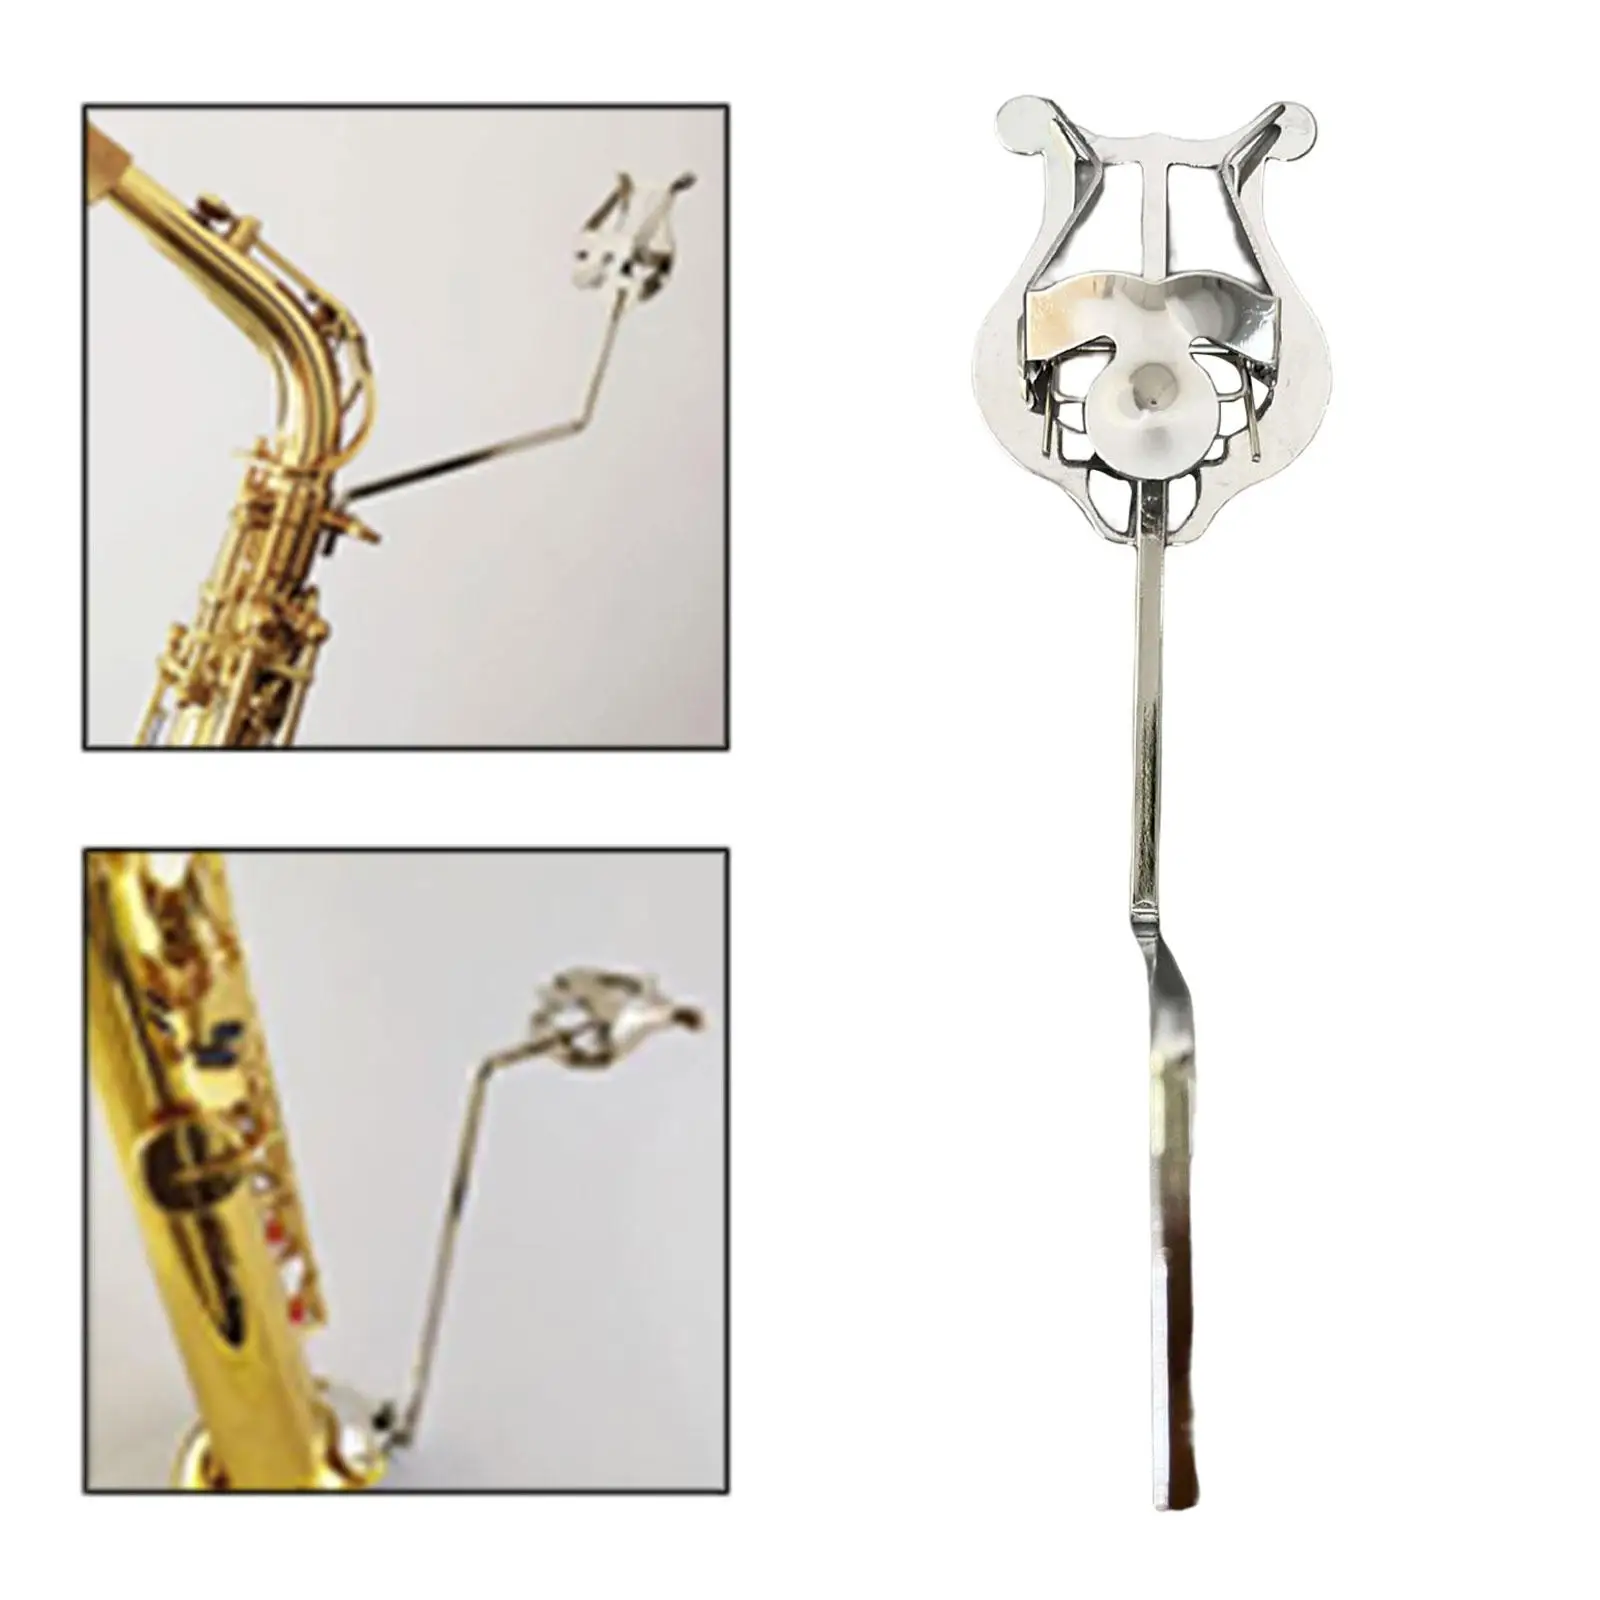 Metal Clarinet Marching Lyre Music Clip ,Trumpet Marching Clamp, Lyre Sheet Music Clip Holder for Saxophone Accessory